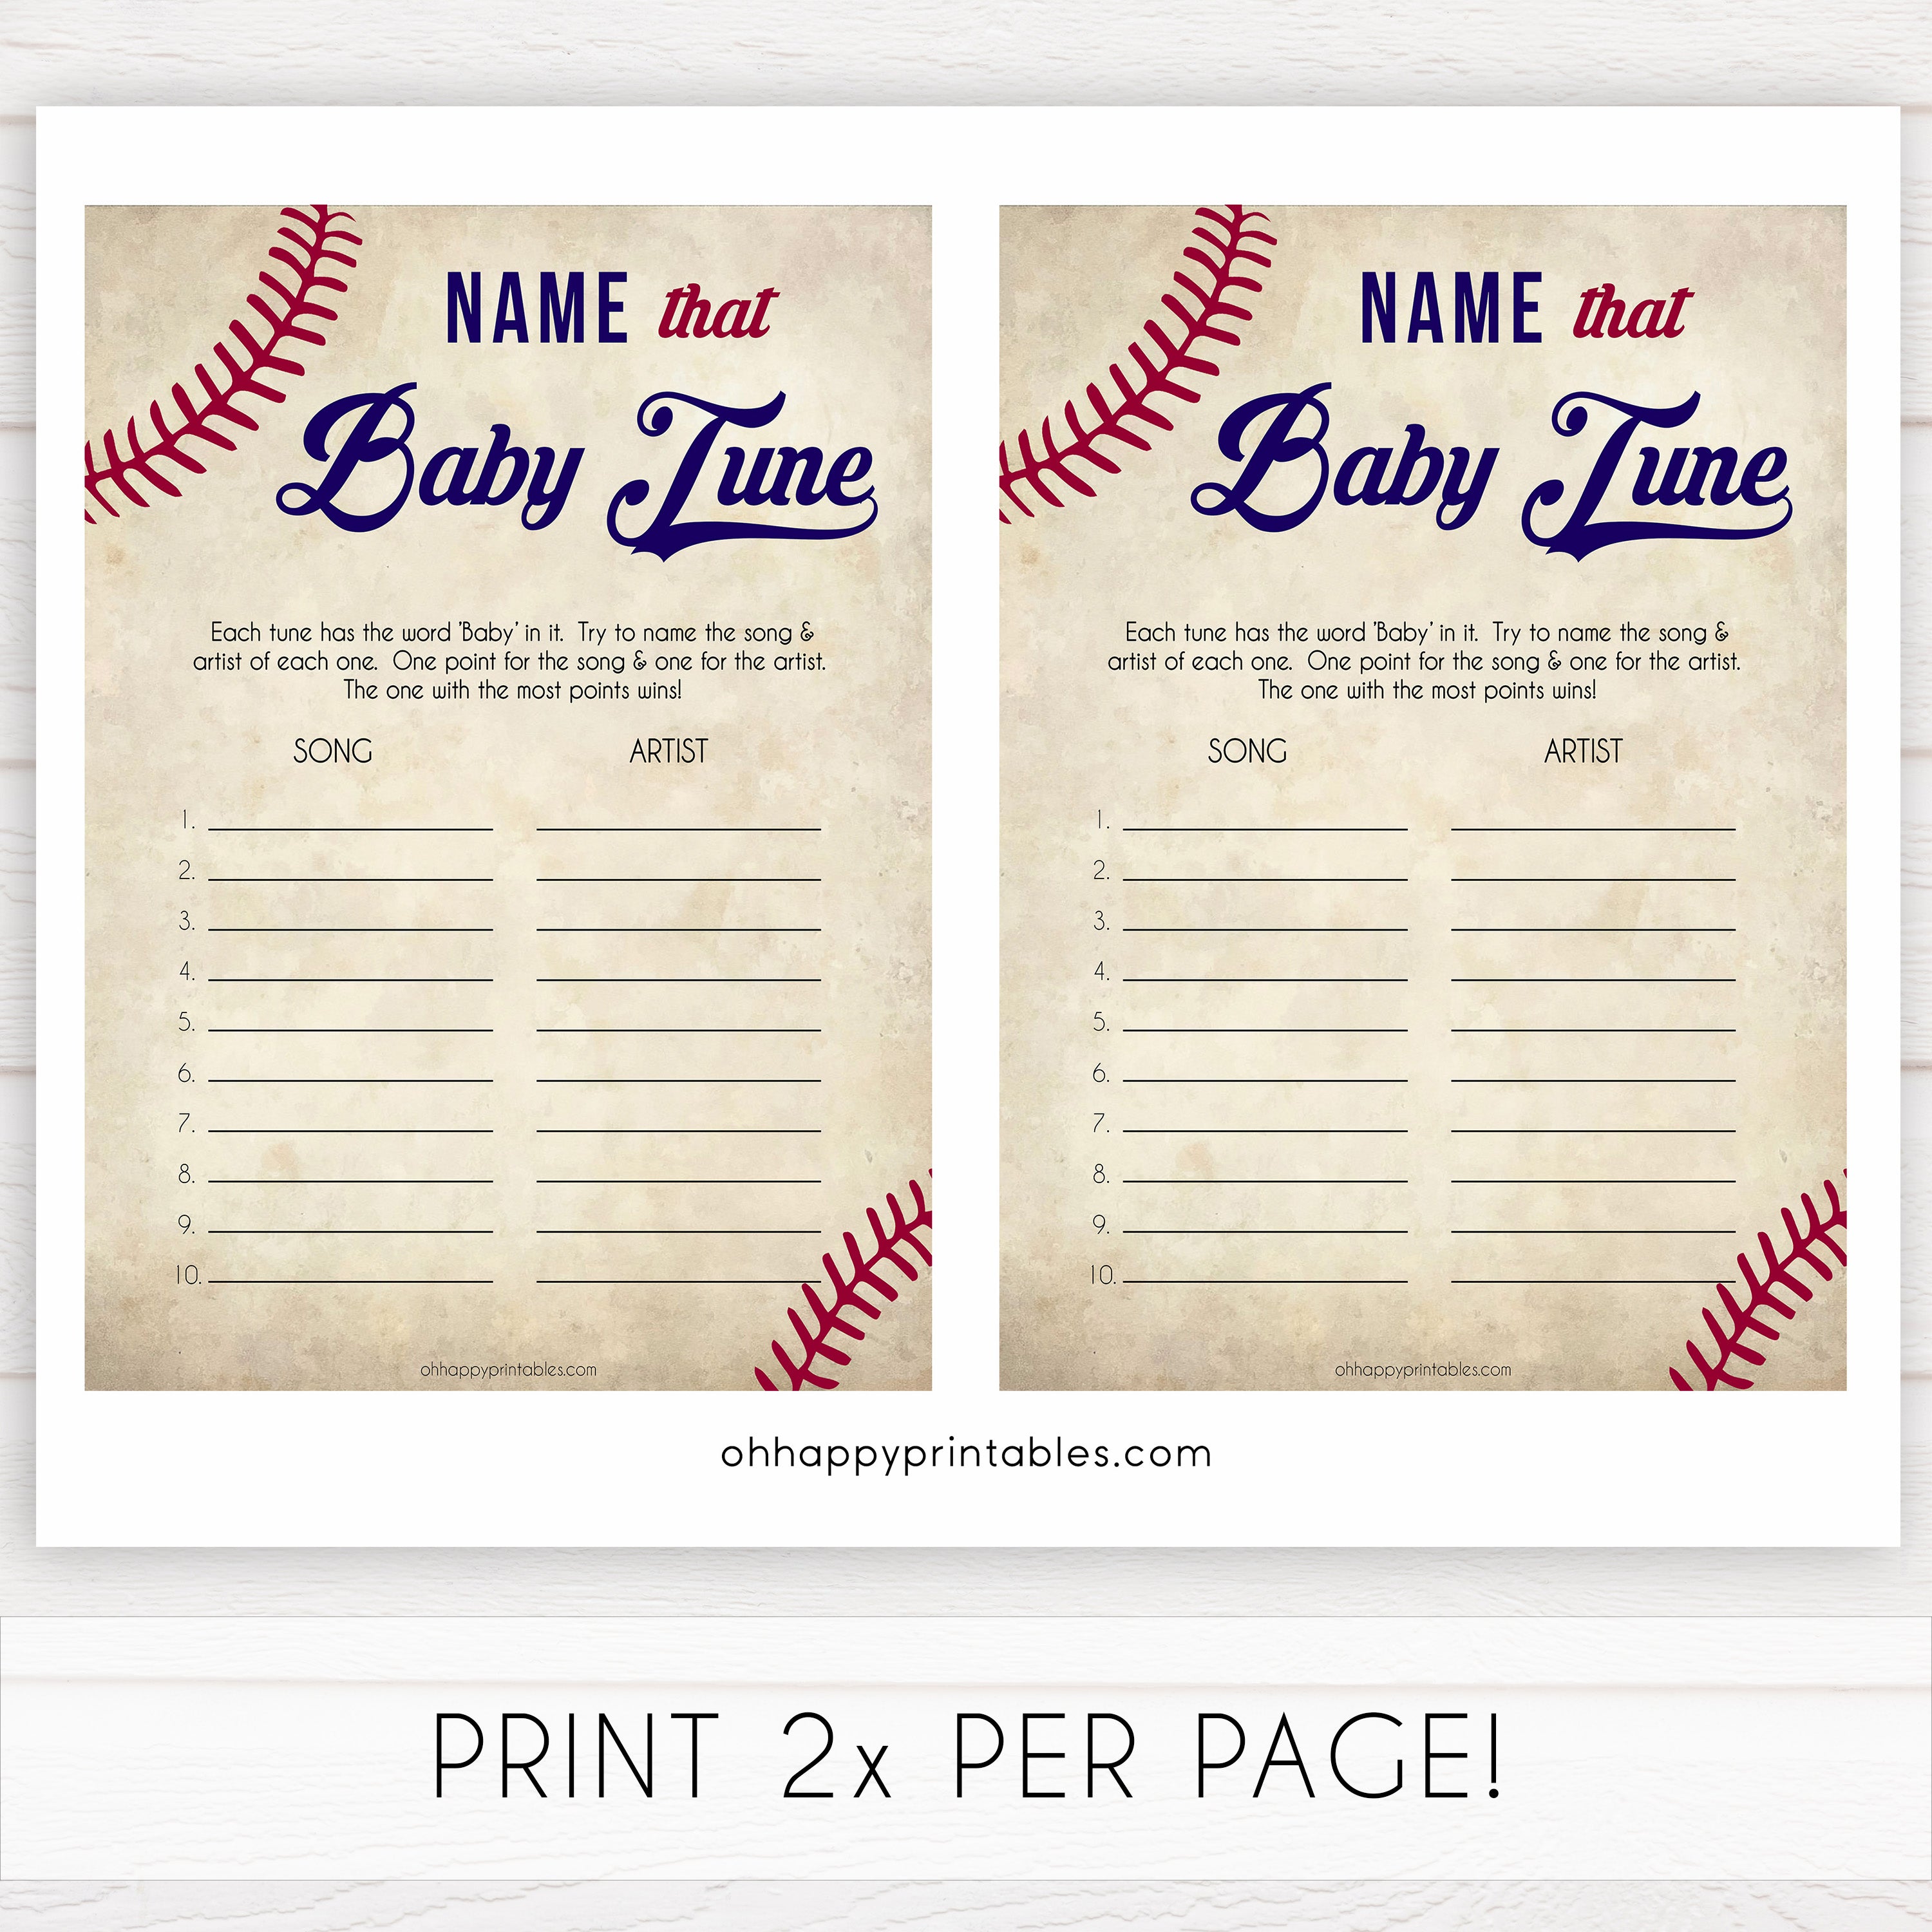 baseball name that baby tune baby shower game, baseball baby shower theme, printable baby shower games, popular baby shower games, fun baby shower gamesbaseball name that baby tune baby shower game, baseball baby shower theme, printable baby shower games, popular baby shower games, fun baby shower games